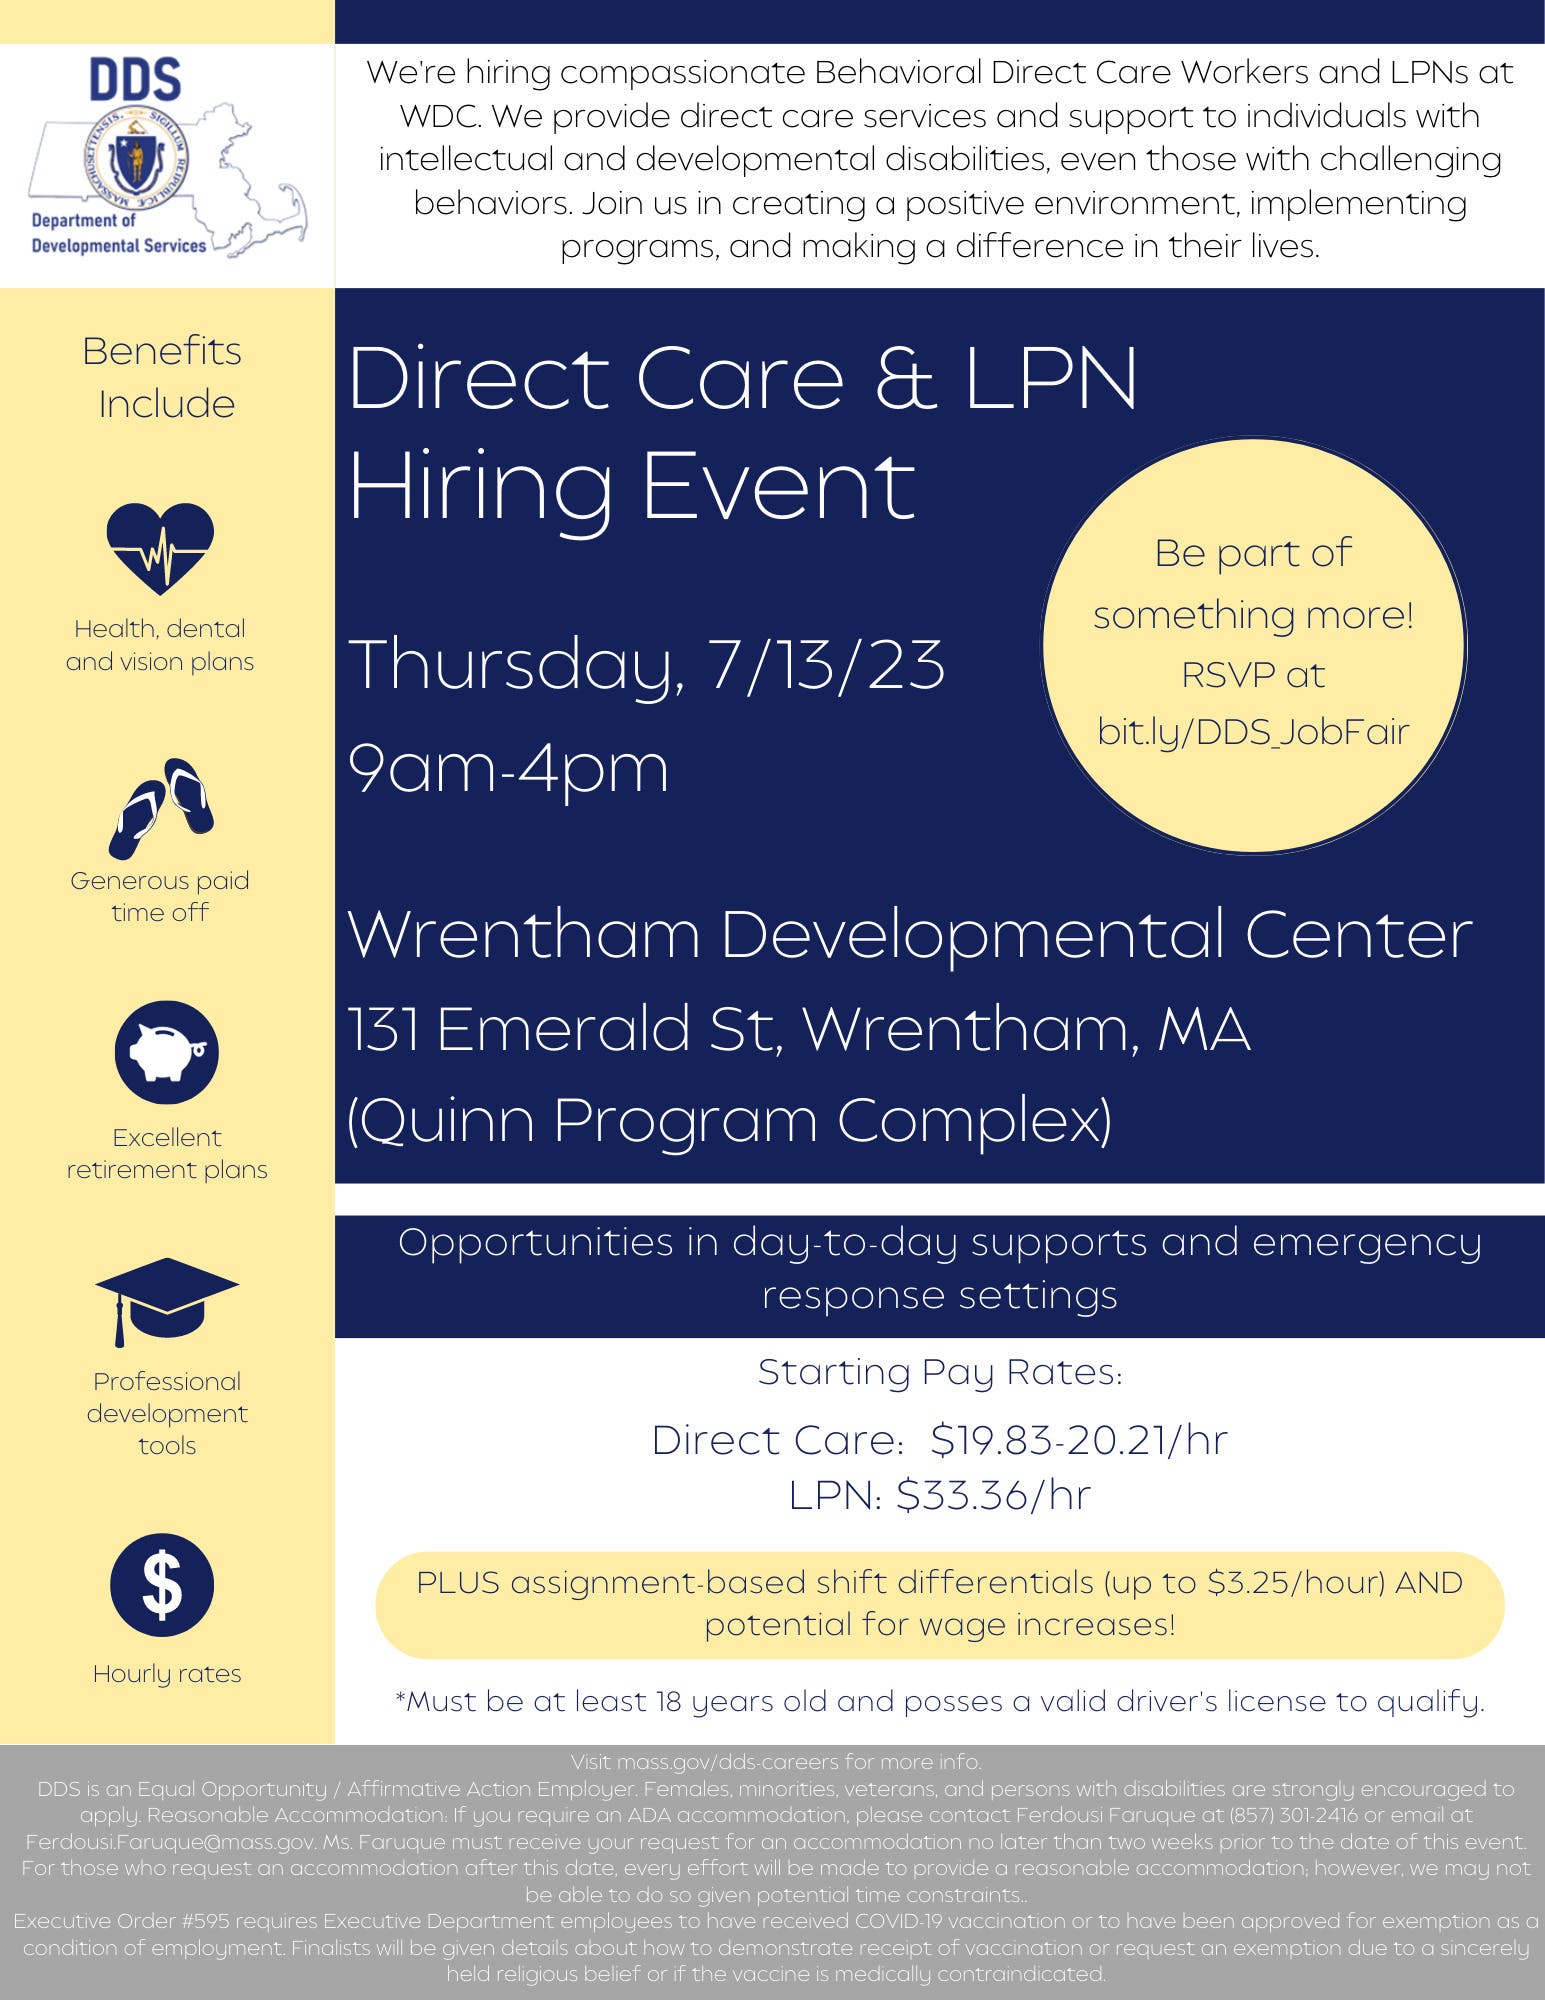 HIRING EVENT: Direct Care & LPN